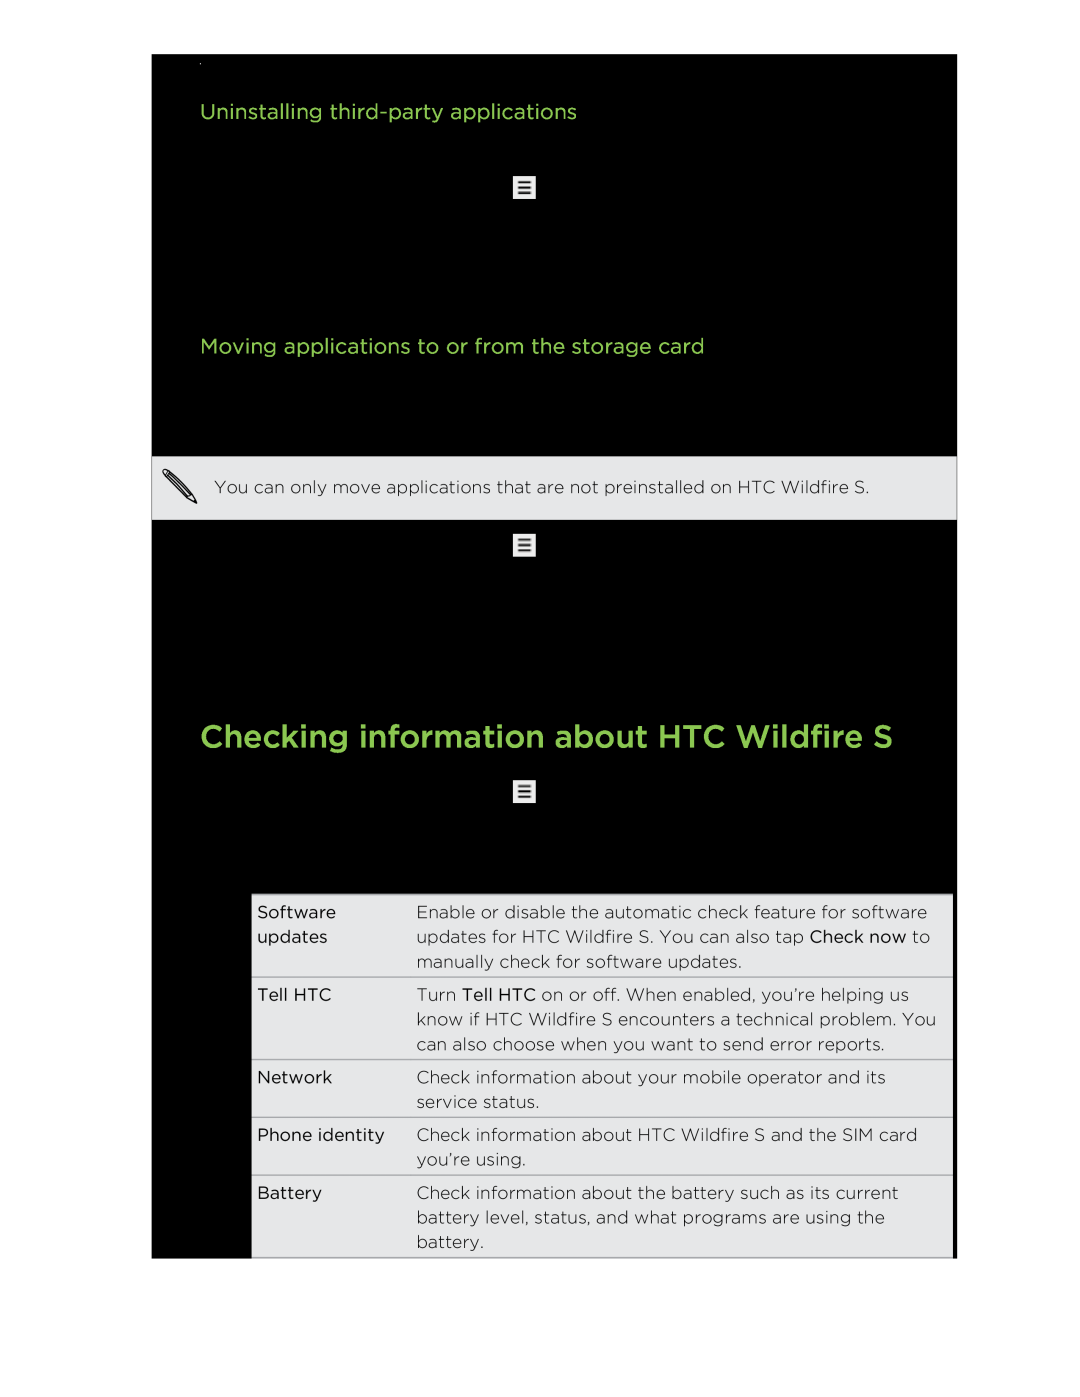 HTC manual Checking information about HTC Wildfire S, Uninstalling third-party applications 